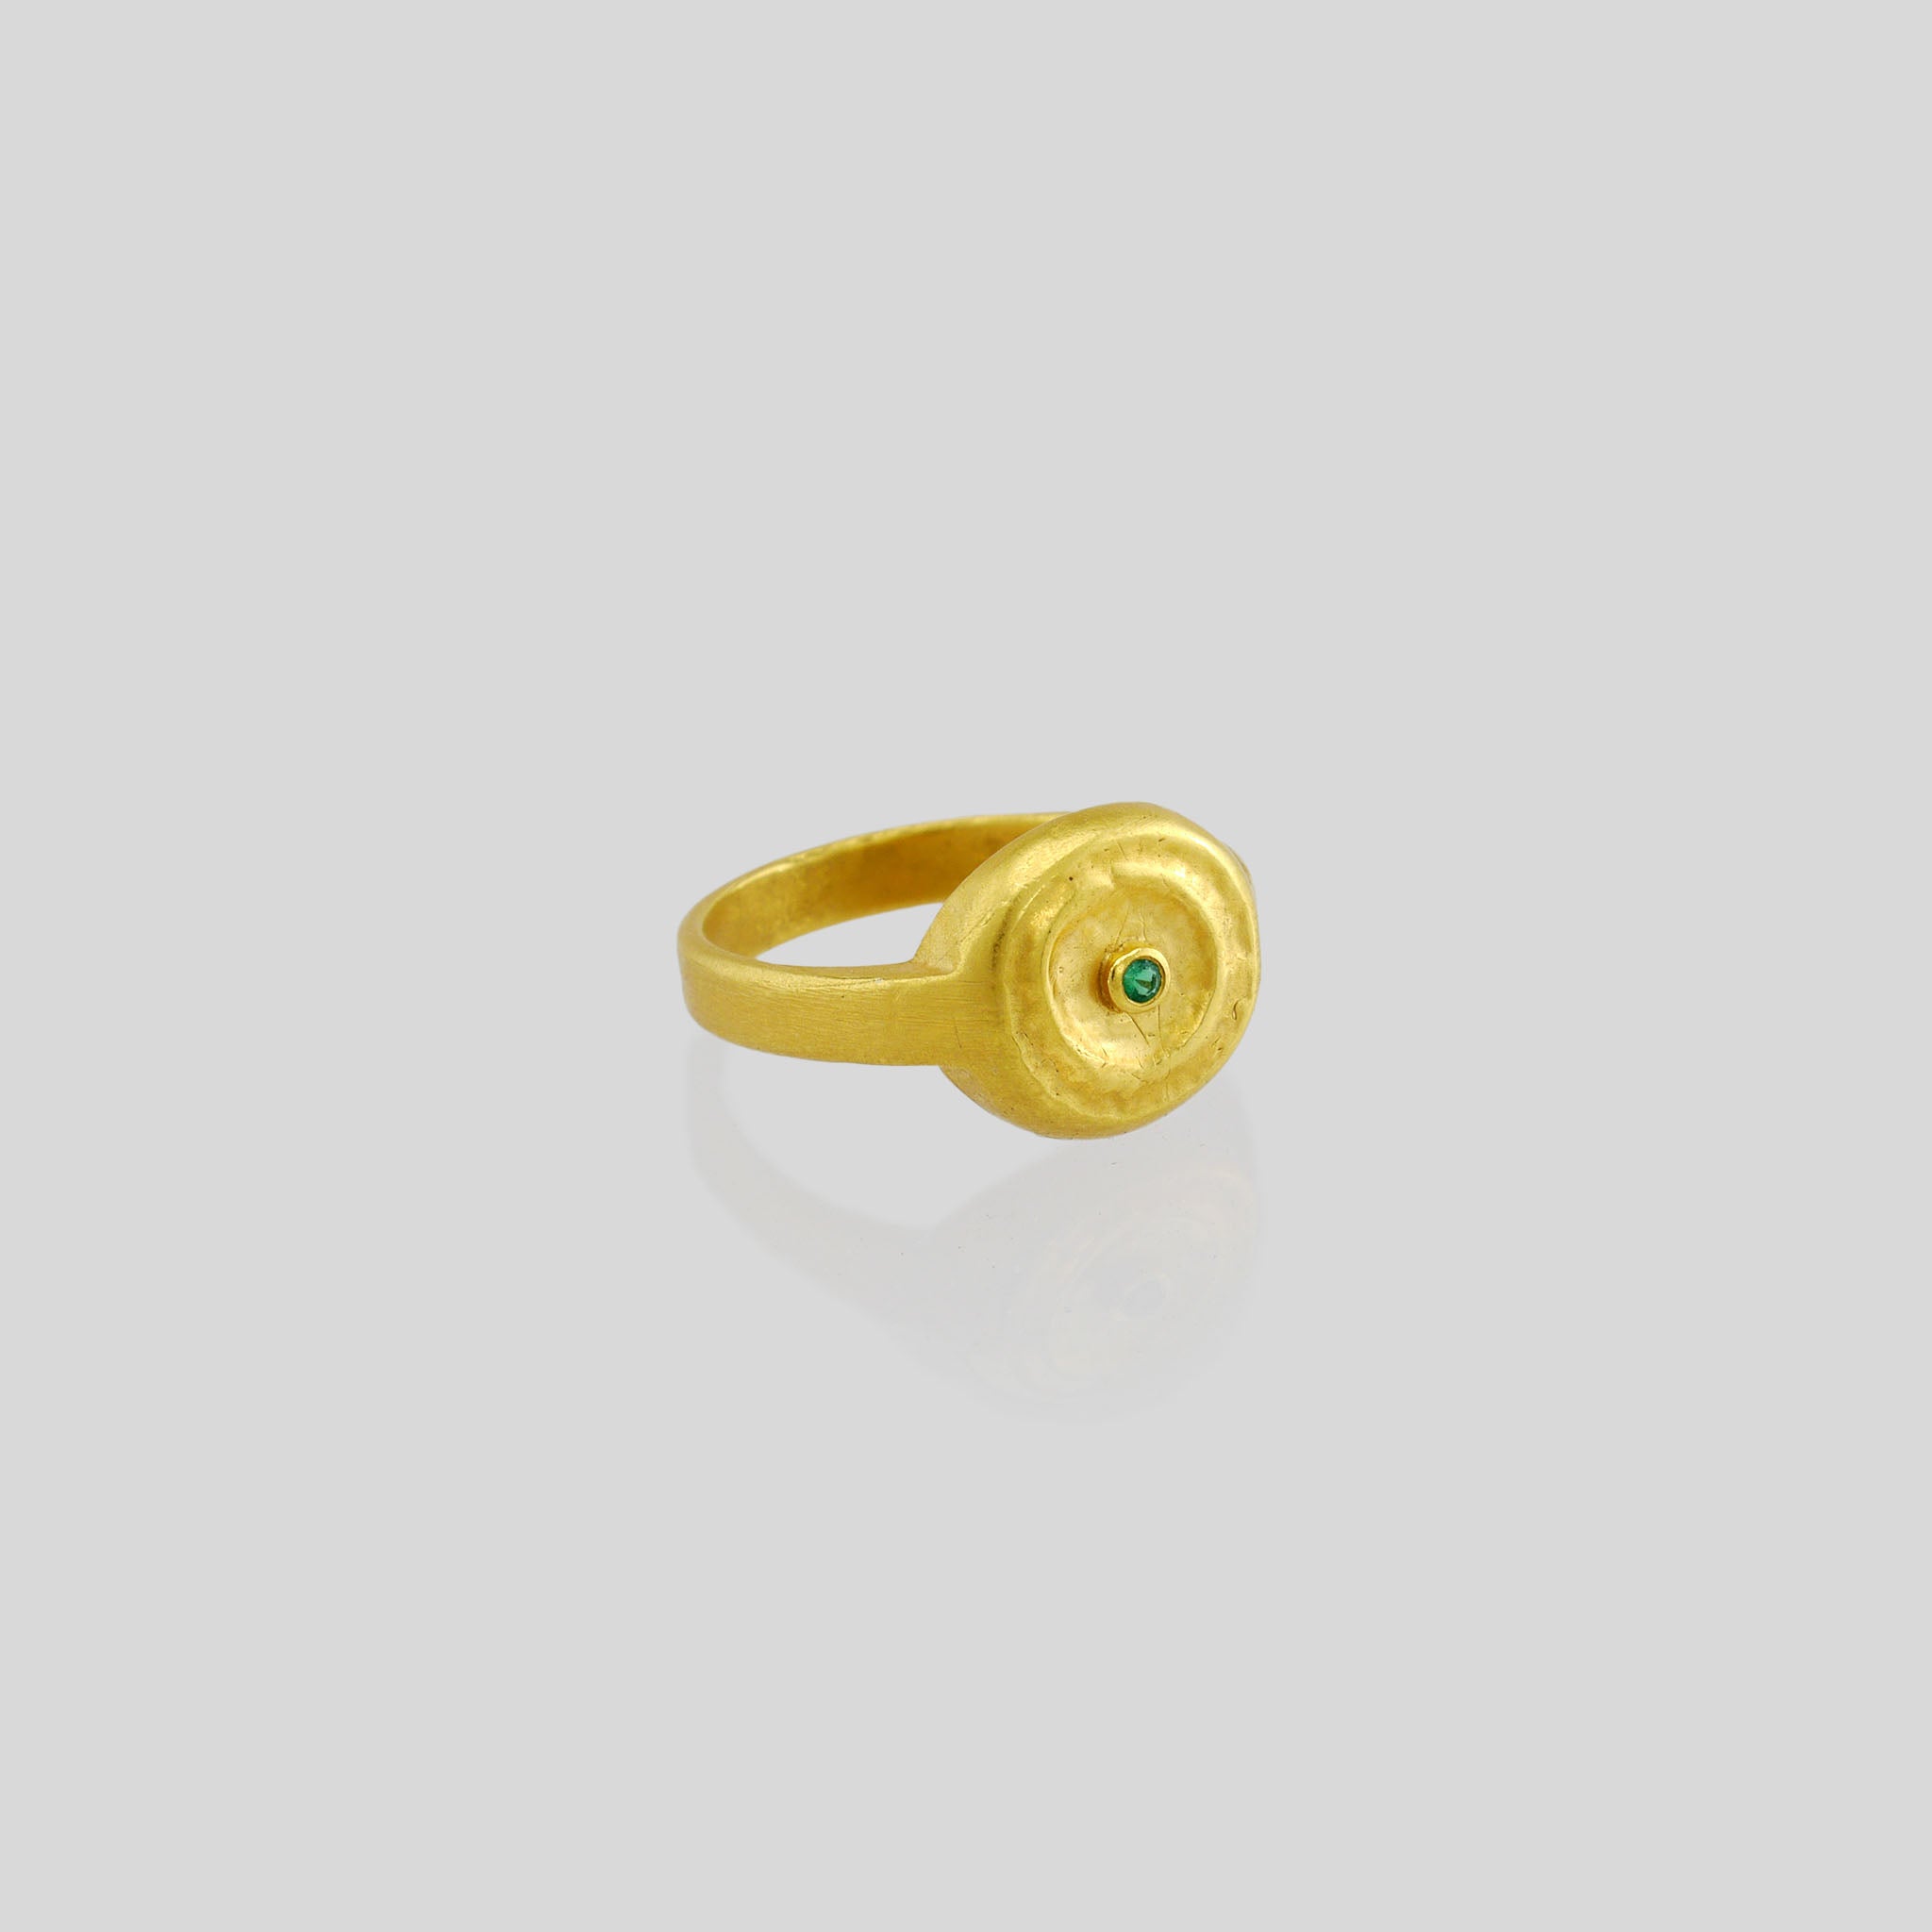 Handmade 18k Gold ring with a central Emerald, exuding vintage charm reminiscent of the Egyptian pharaohs' era.